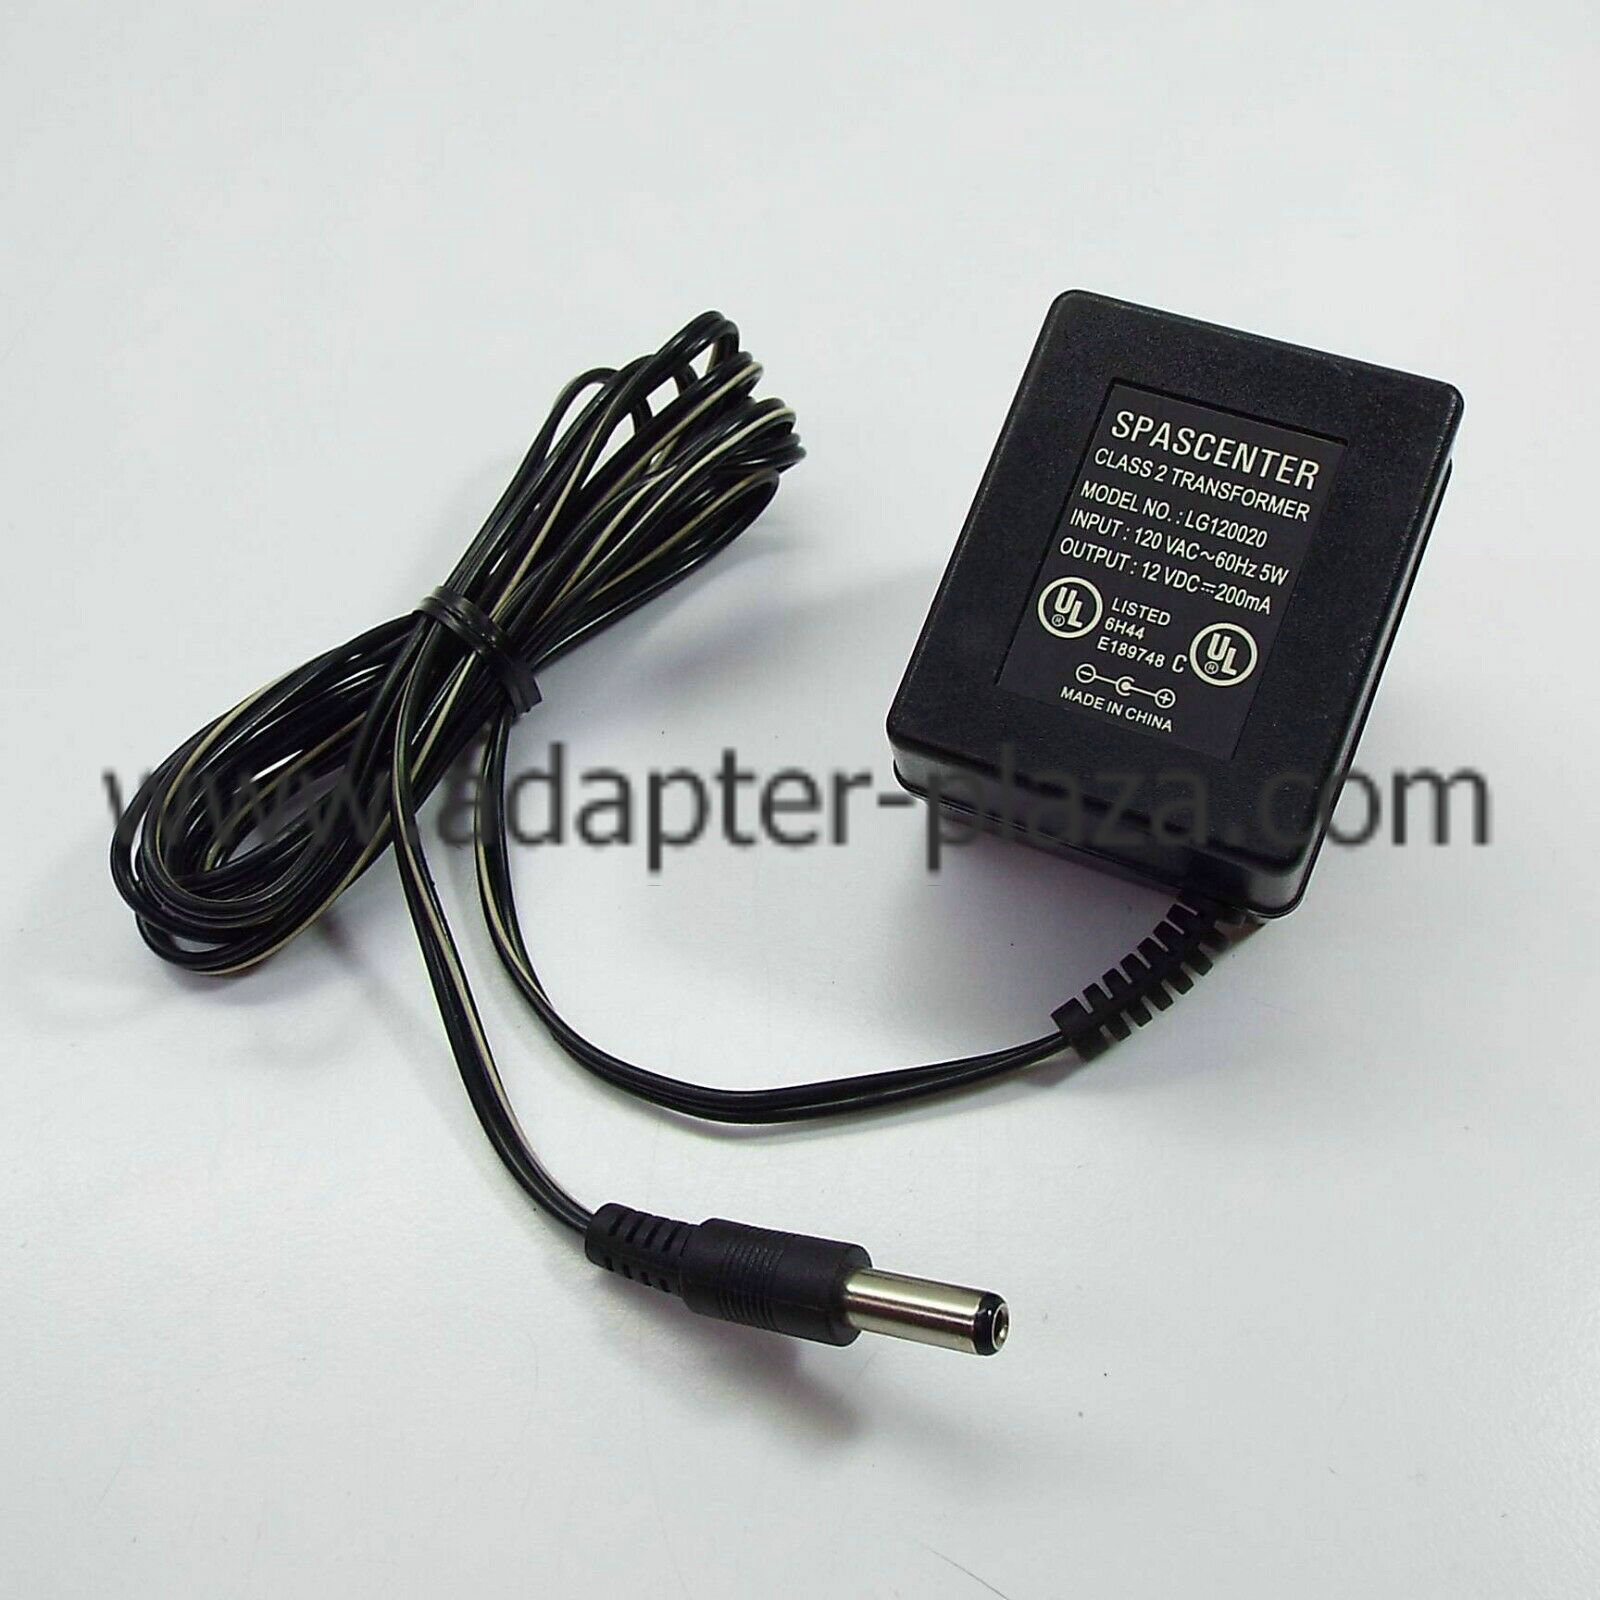 *Brand NEW*SPASCENTER LG120020 12VDC 200MA AC DC Adapter POWER SUPPLY